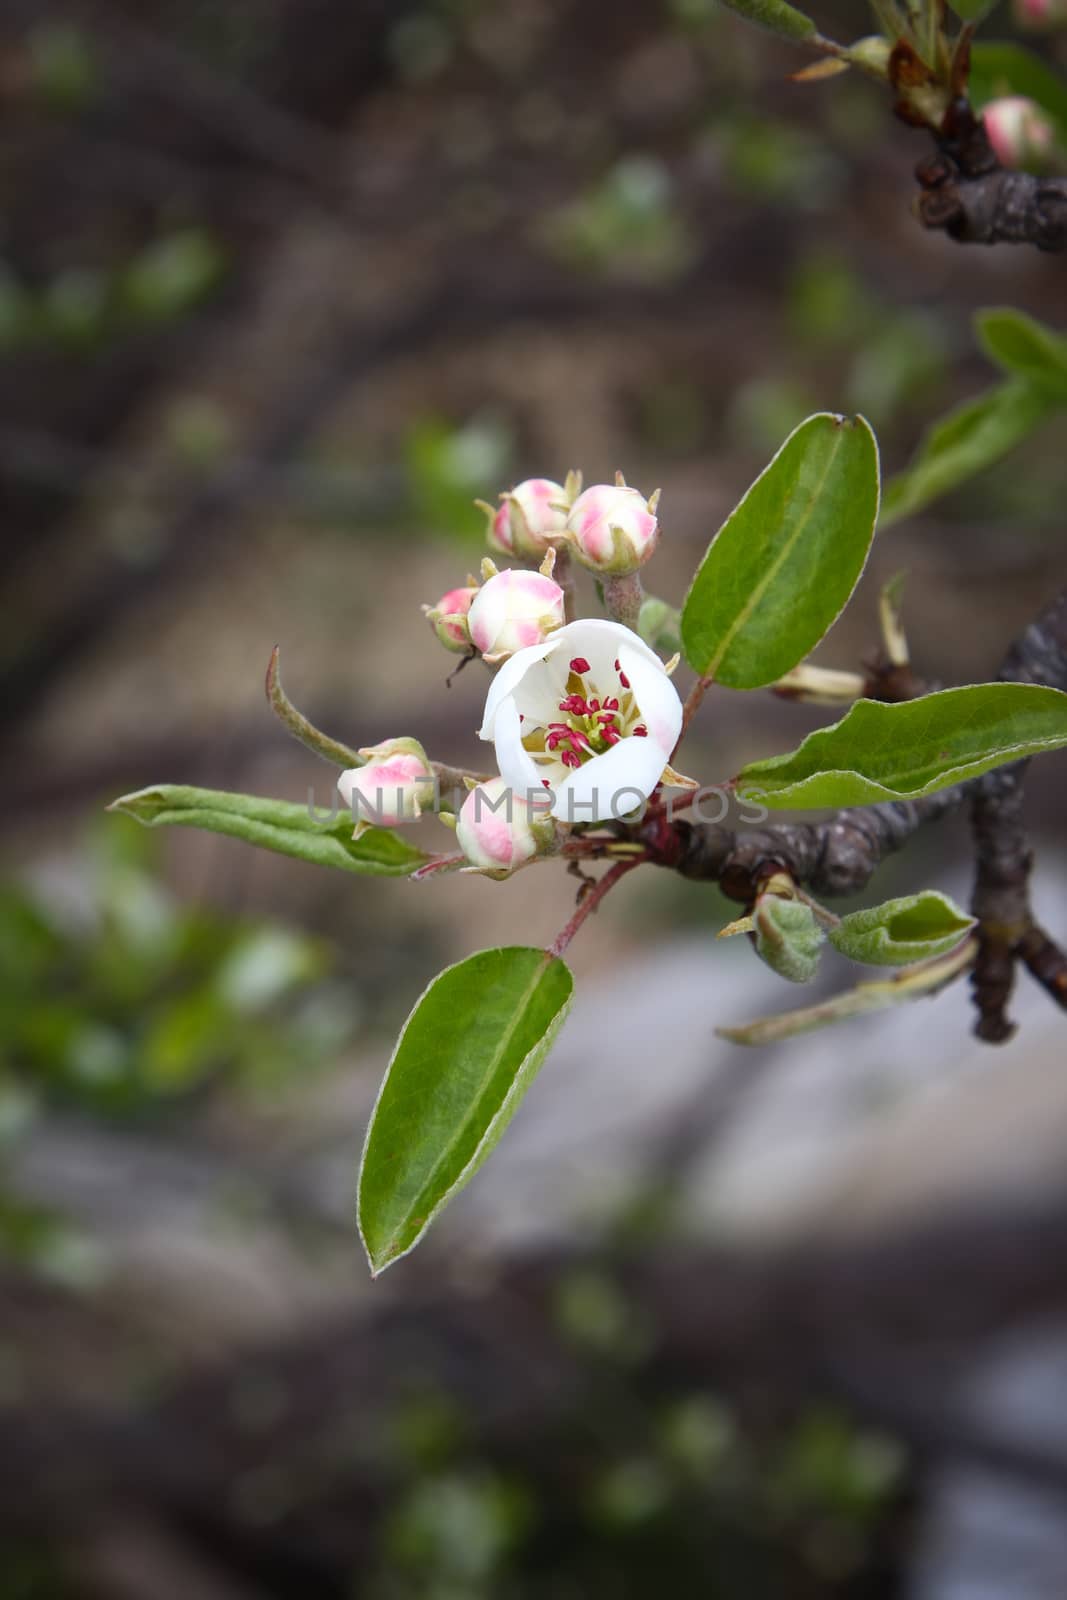 An image of some nice apple blossoms